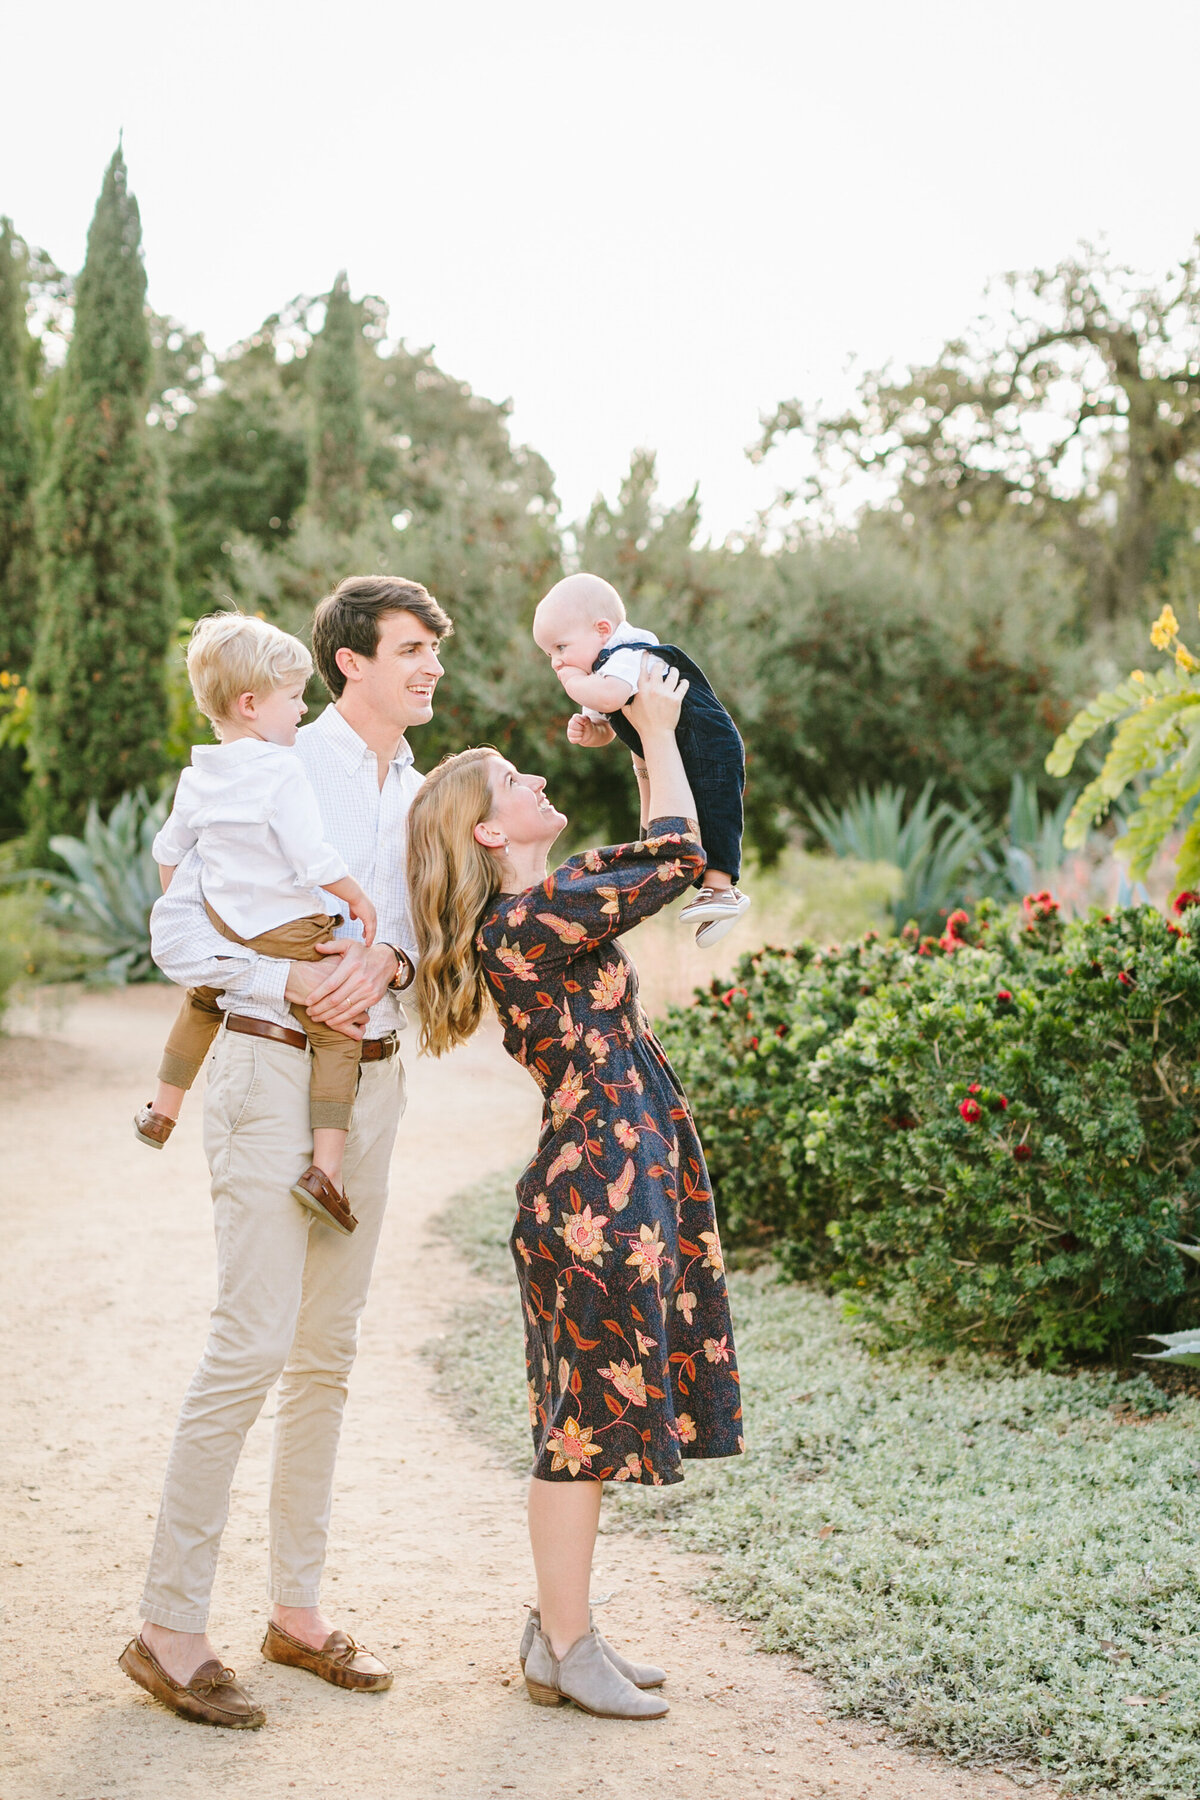 Best California and Texas Family Photographer-Jodee Debes Photography-284